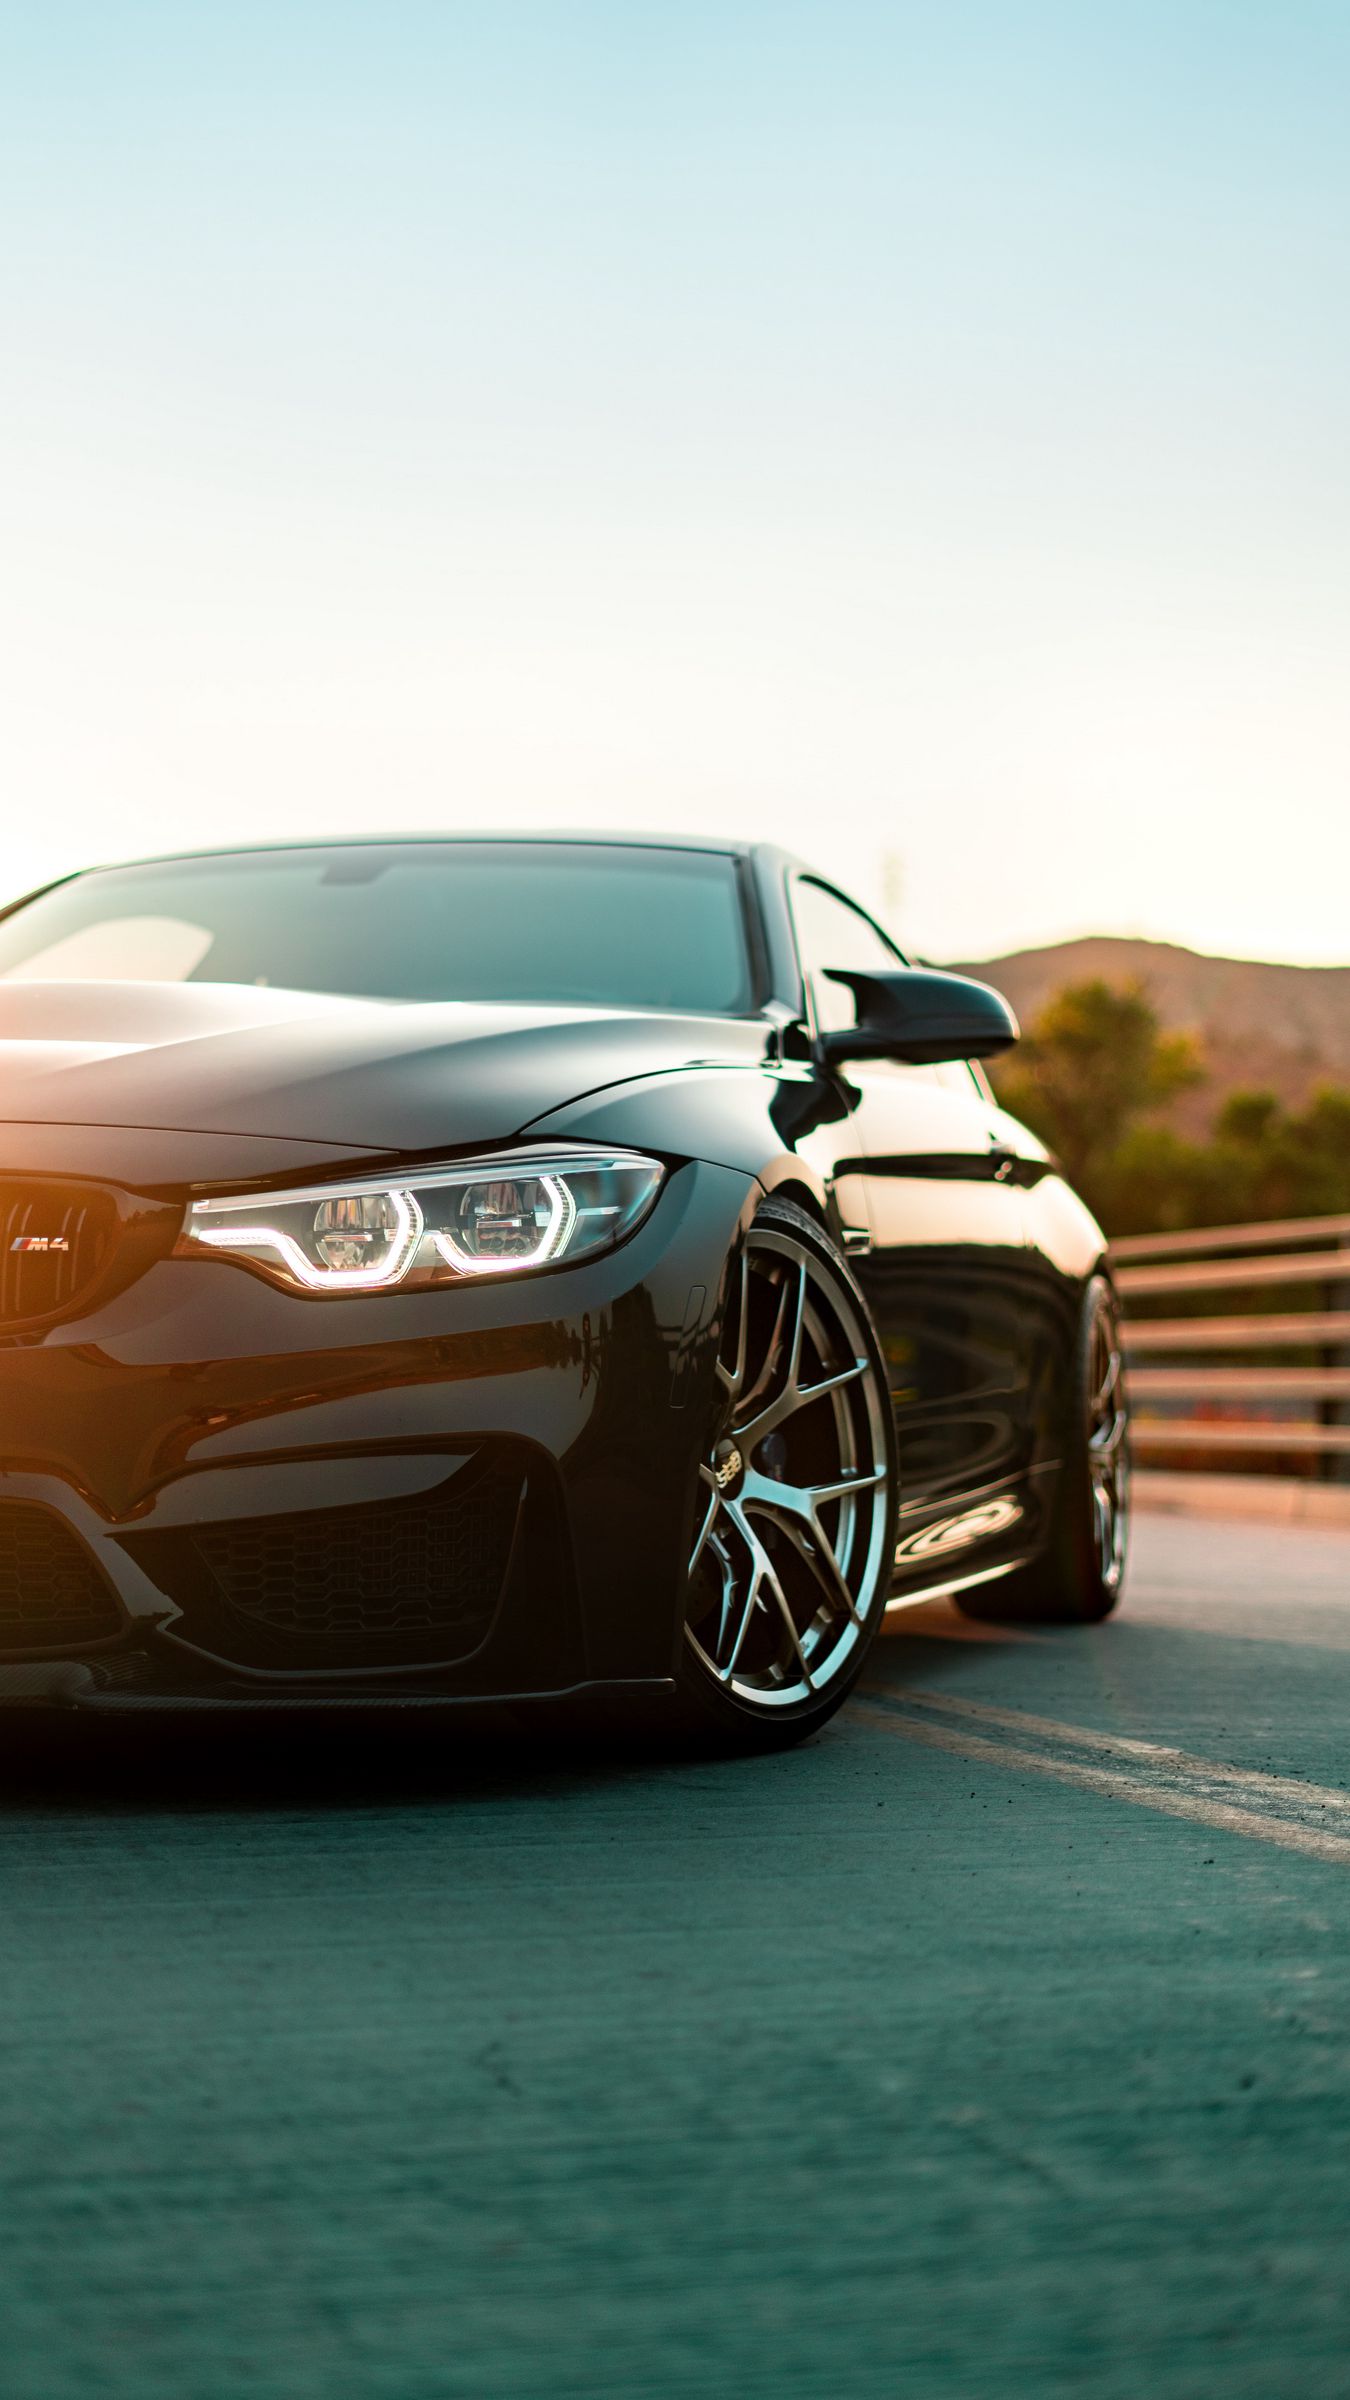 Download wallpaper 1350x2400 bmw m4, bmw, car, front view, headlight, black  iphone 8+/7+/6s+/6+ for parallax hd background